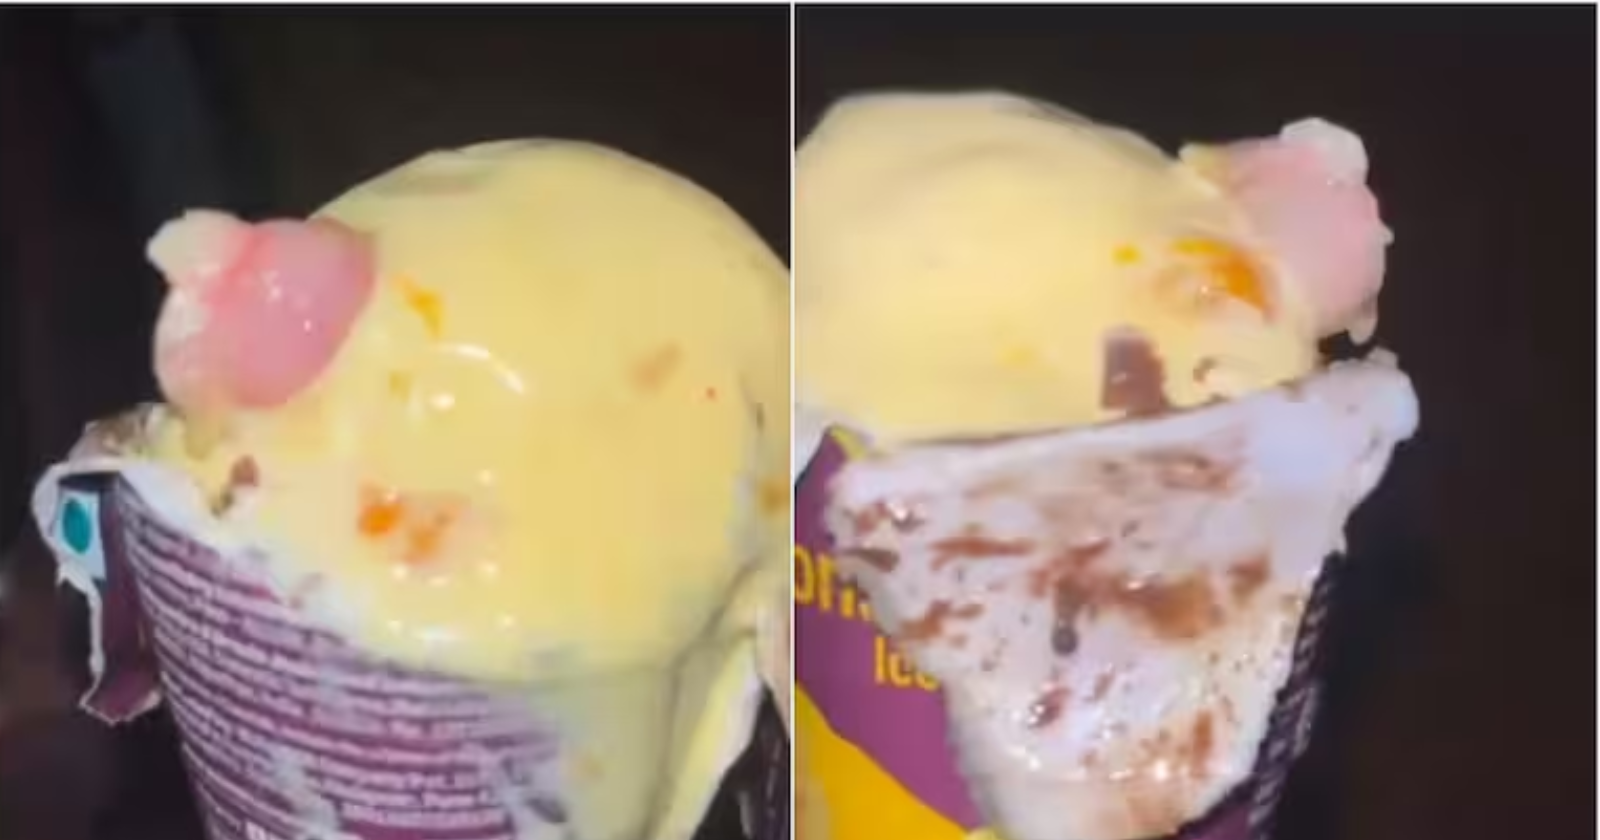 Yummo Ice Creams Response Goes Viral After Man Claims To